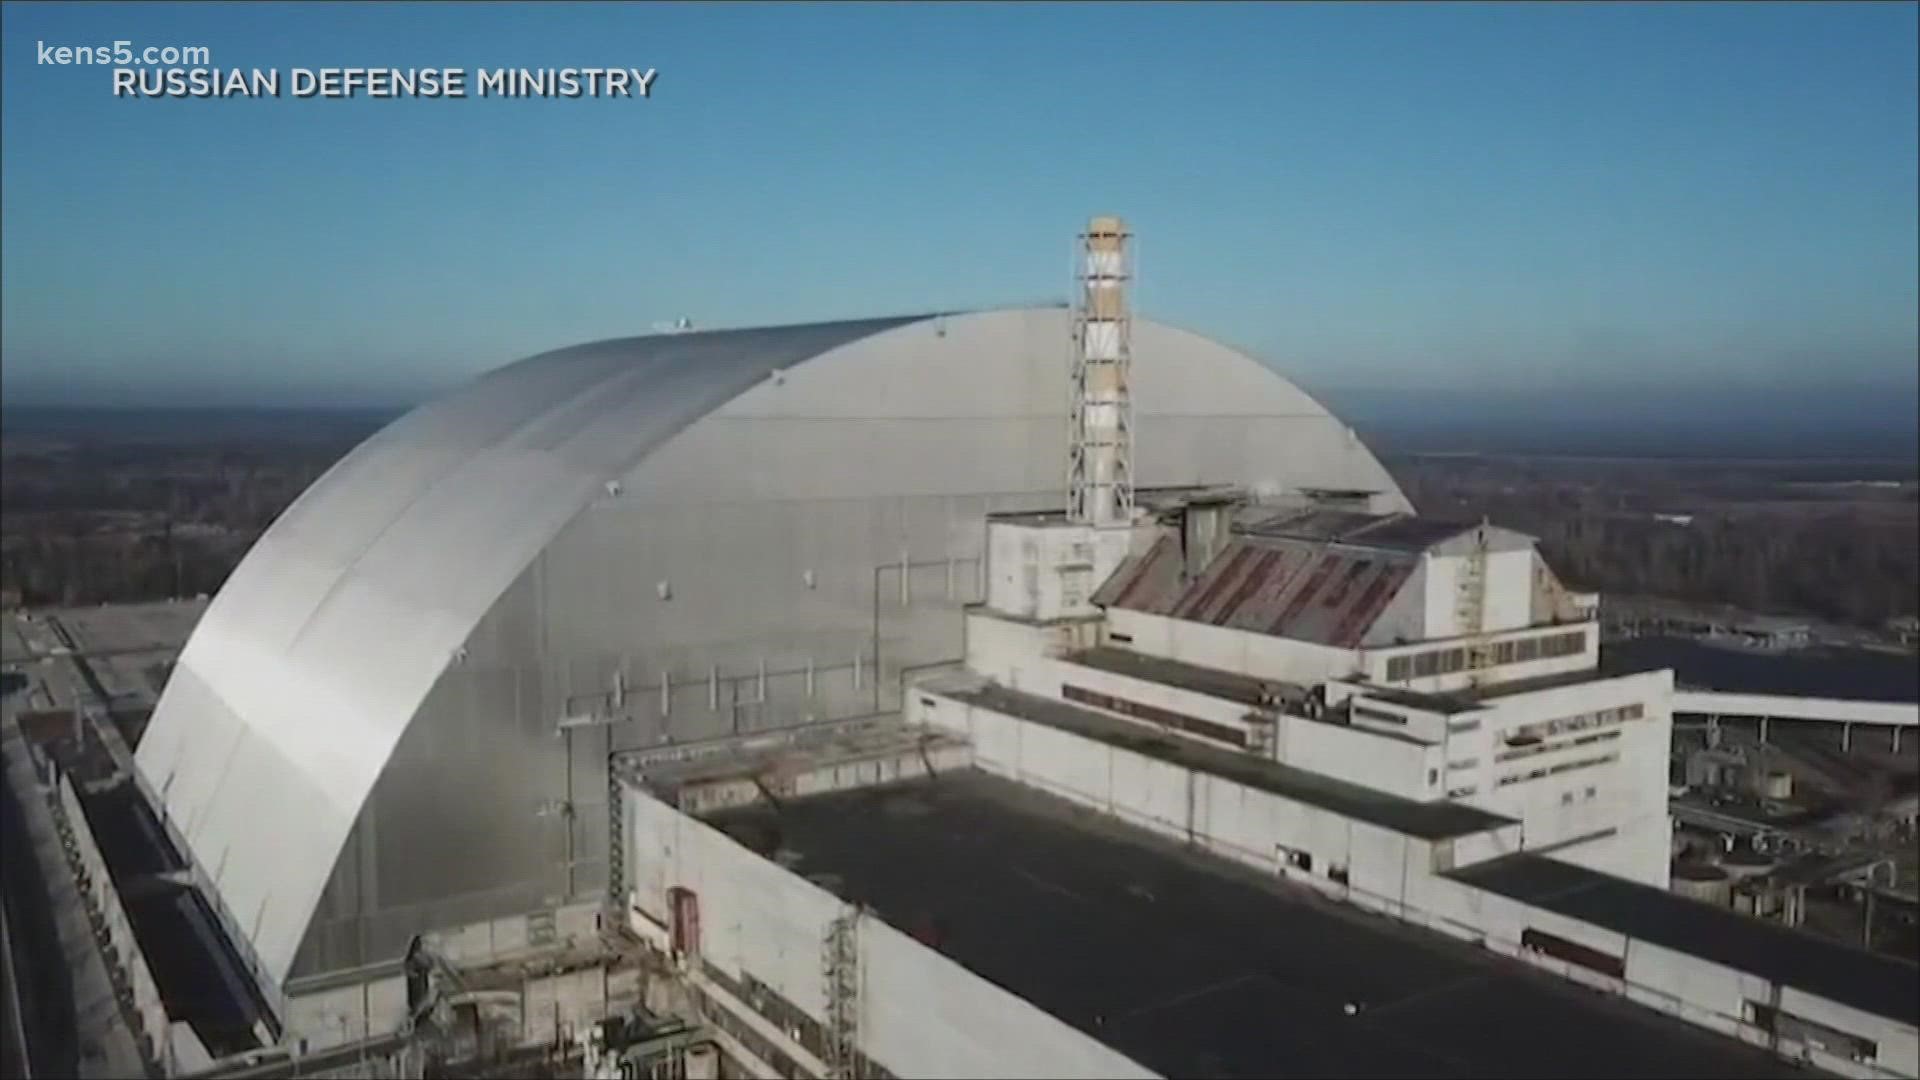 International leaders are worried the Russians would target the Chernobyl Nuclear Plant.